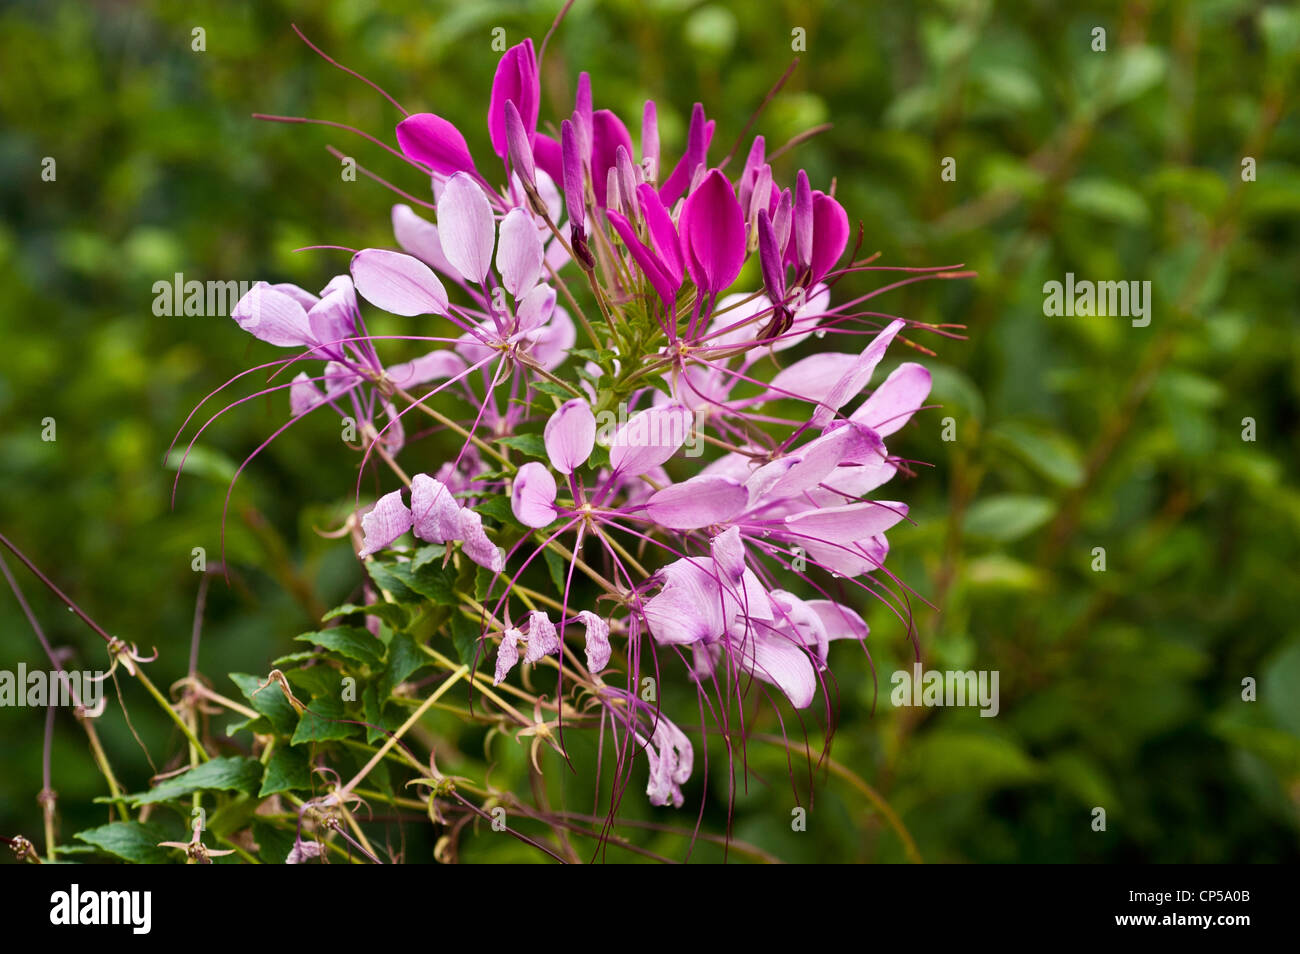 Floral Details about   Original PHOTOGRAPH of a beautiful PINK CLEOME in Bloom 